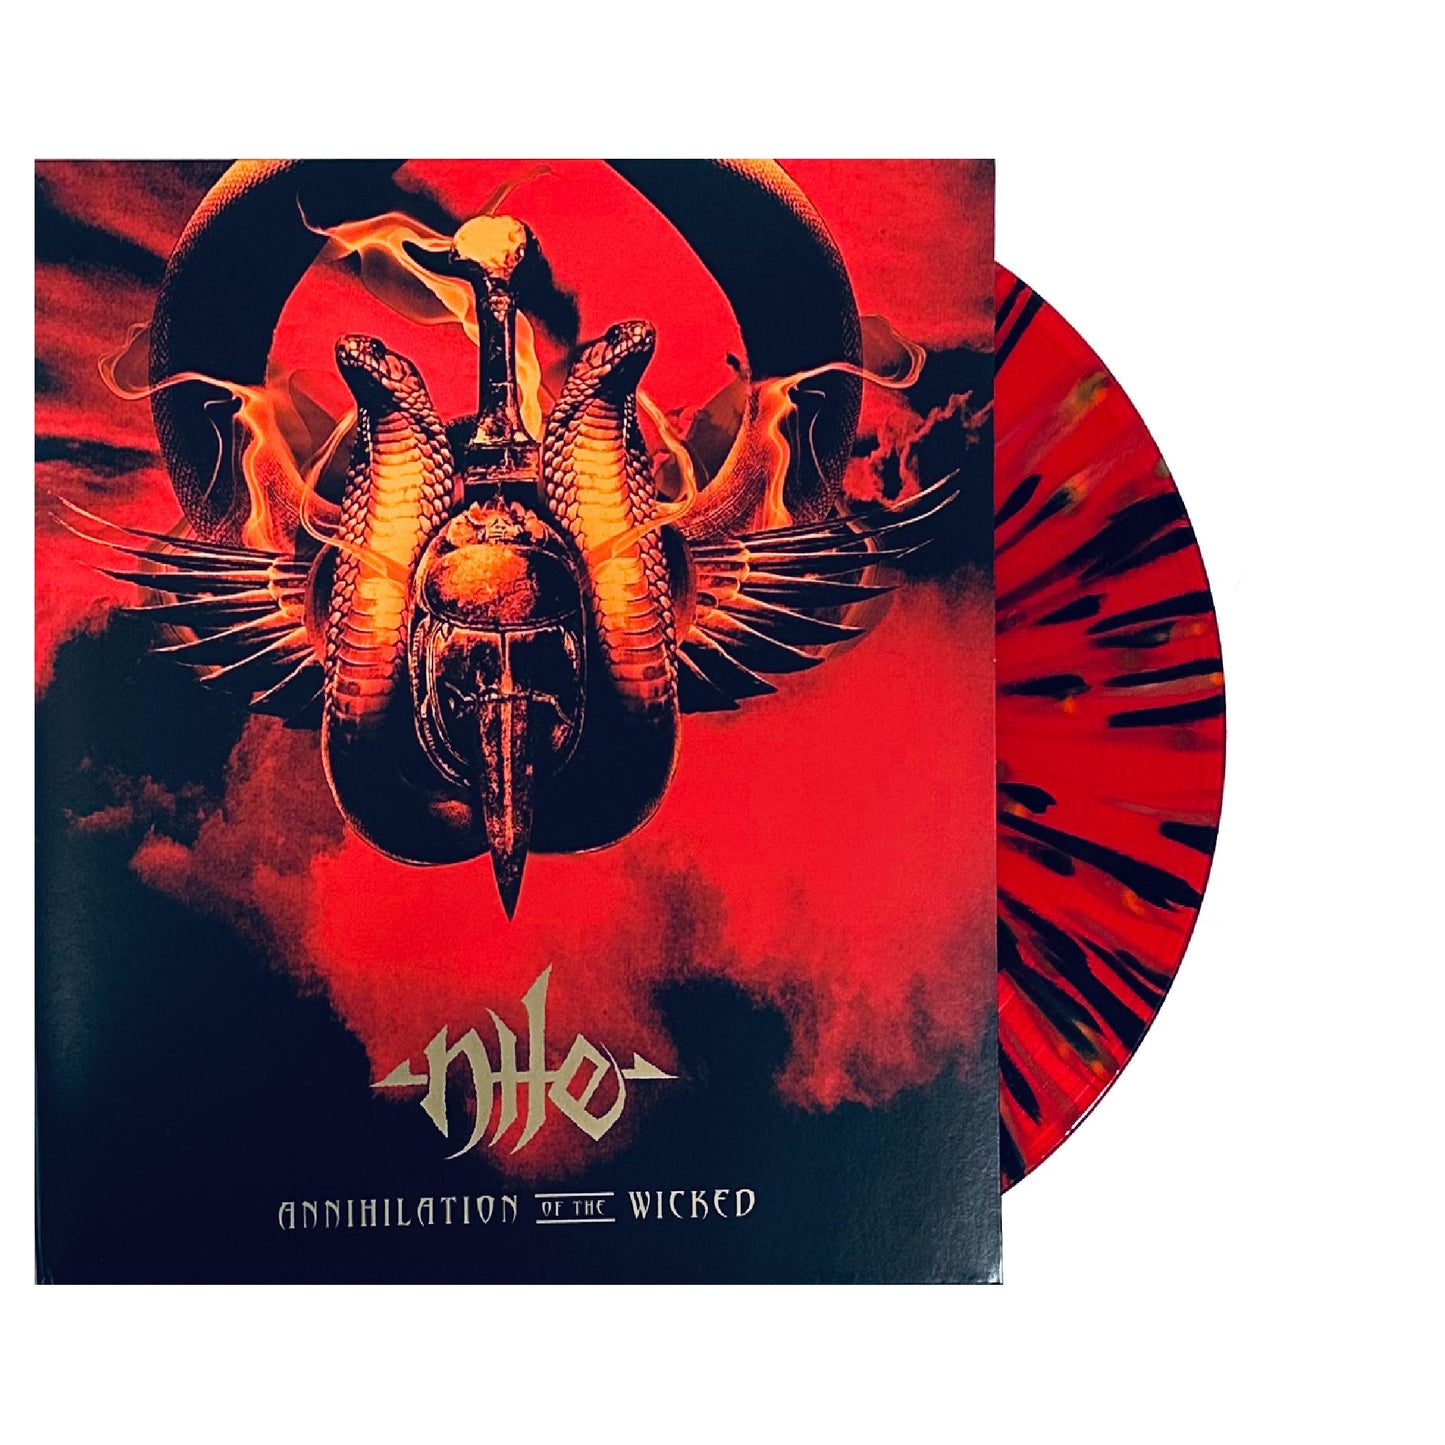 Nile - Annihilation of the Wicked LP (color vinyl)